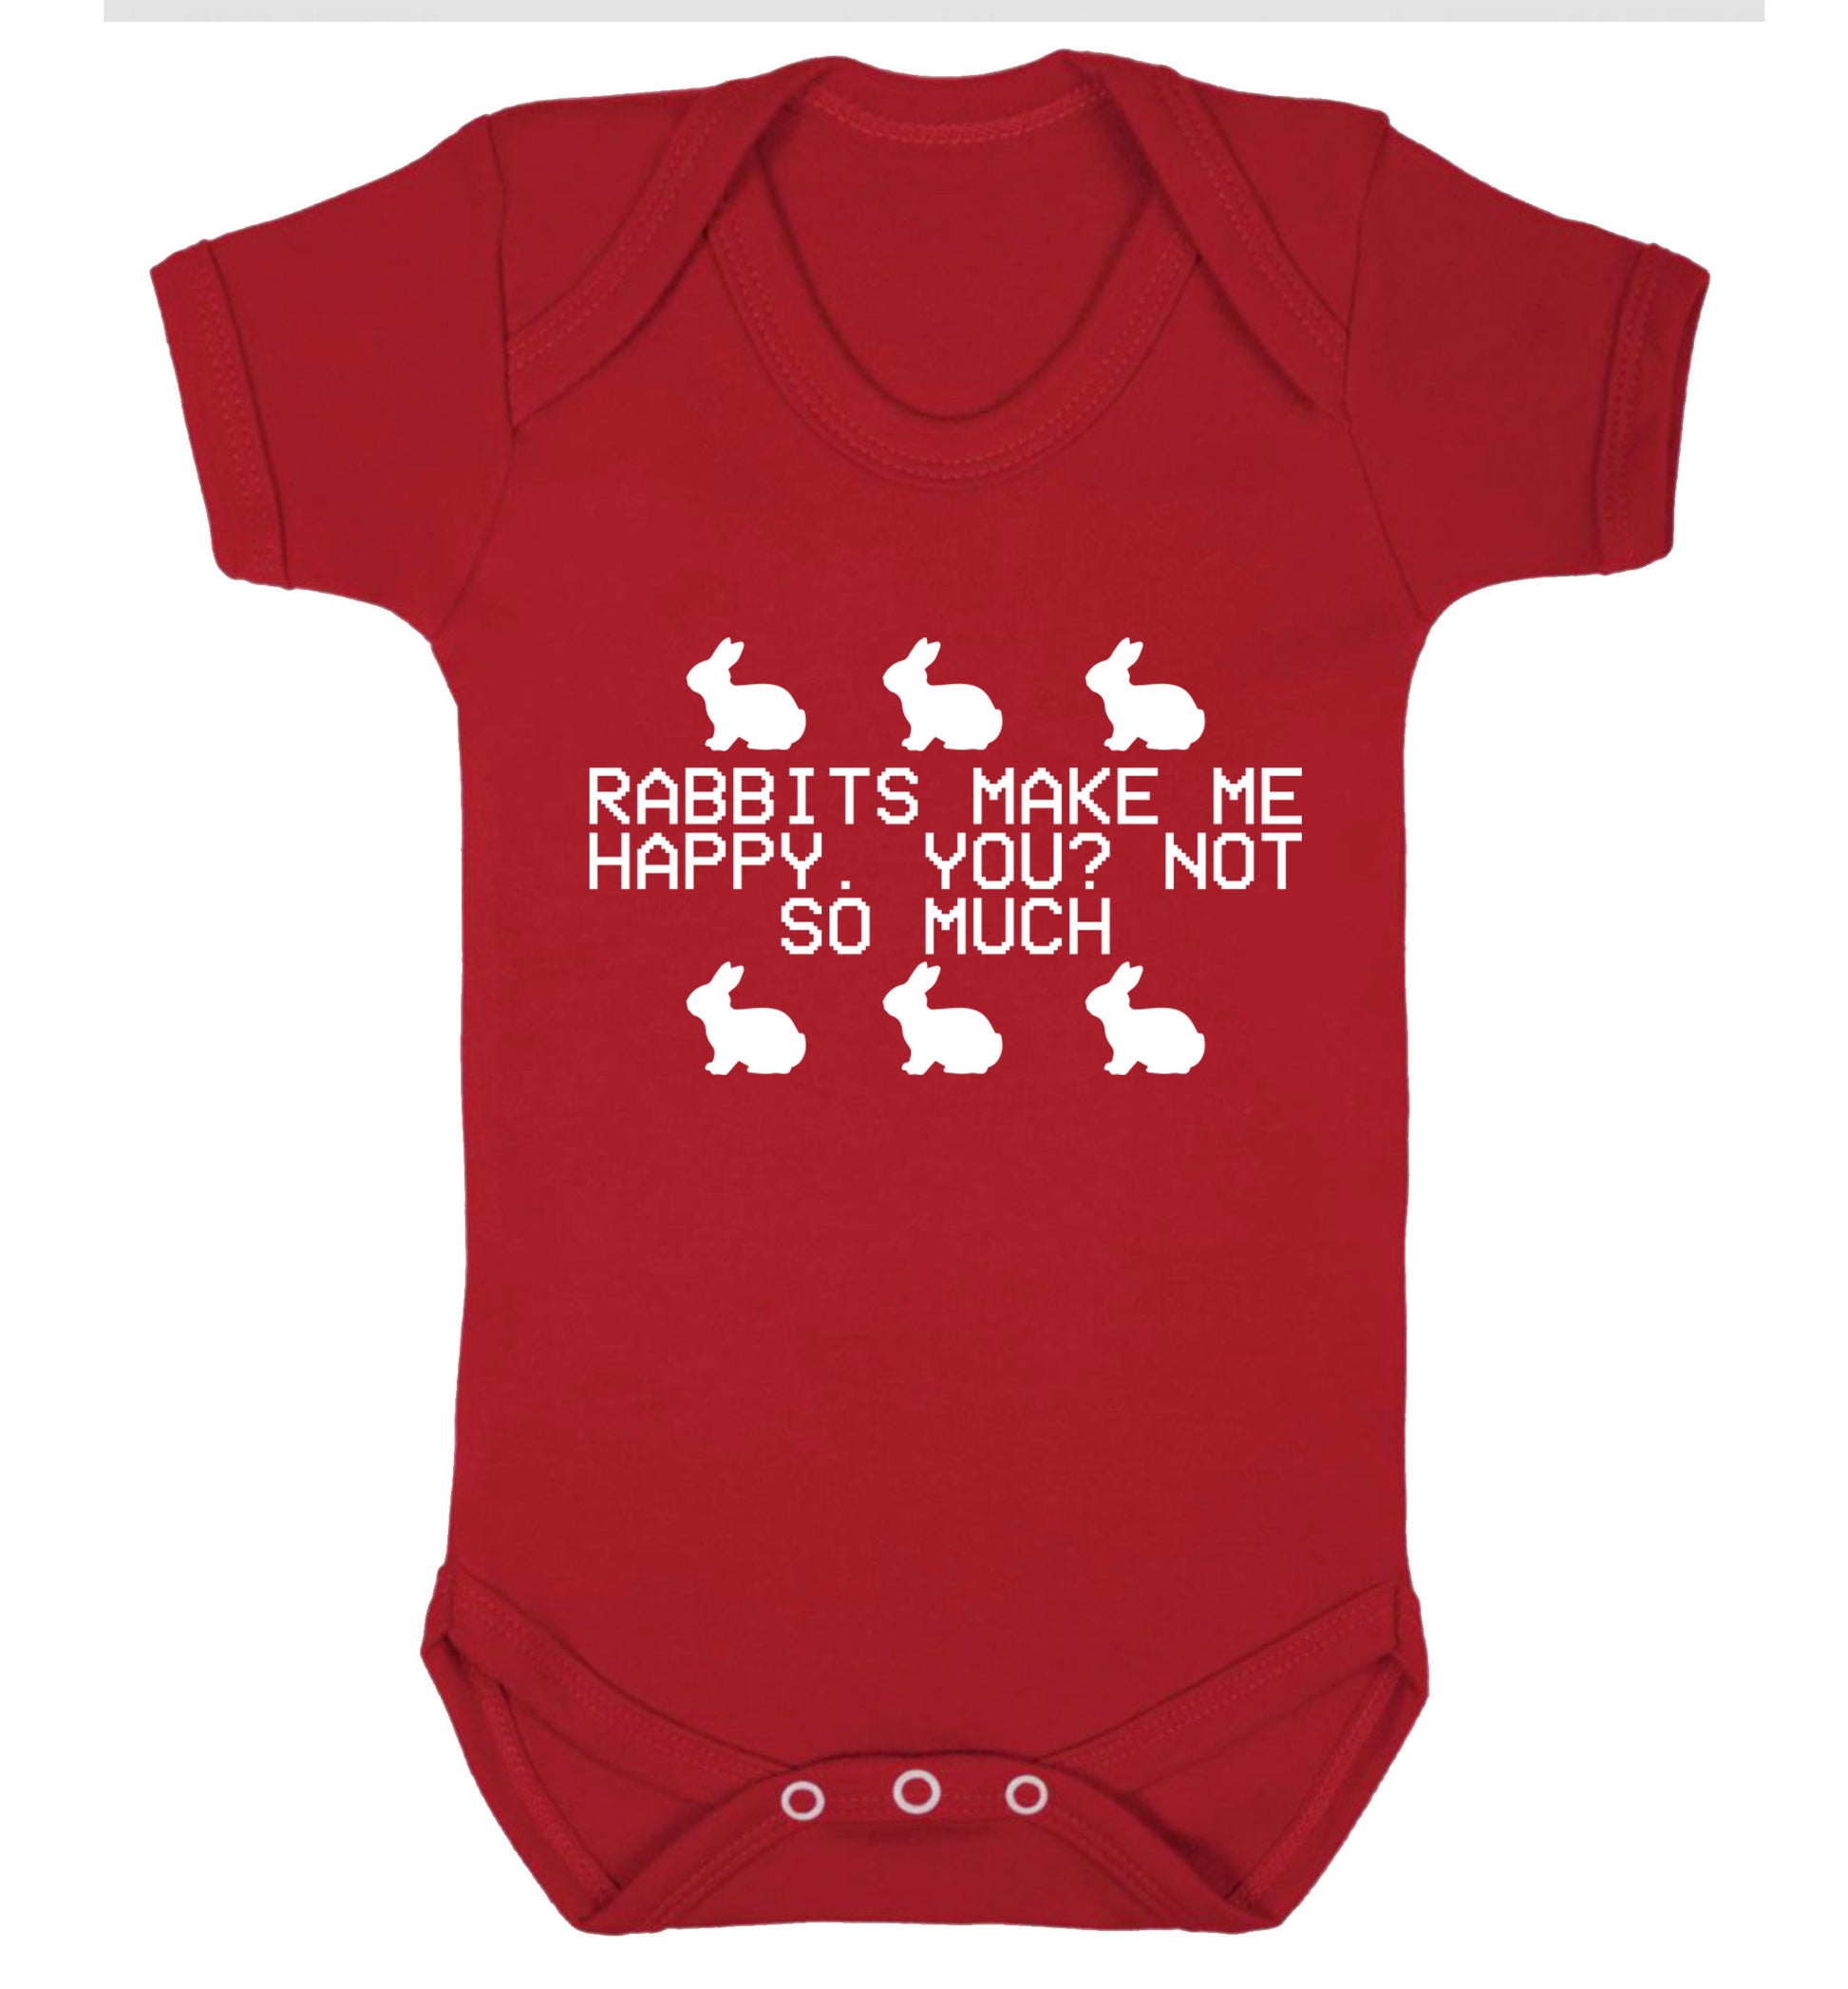 Rabbits make me happy, you not so much Baby Vest red 18-24 months